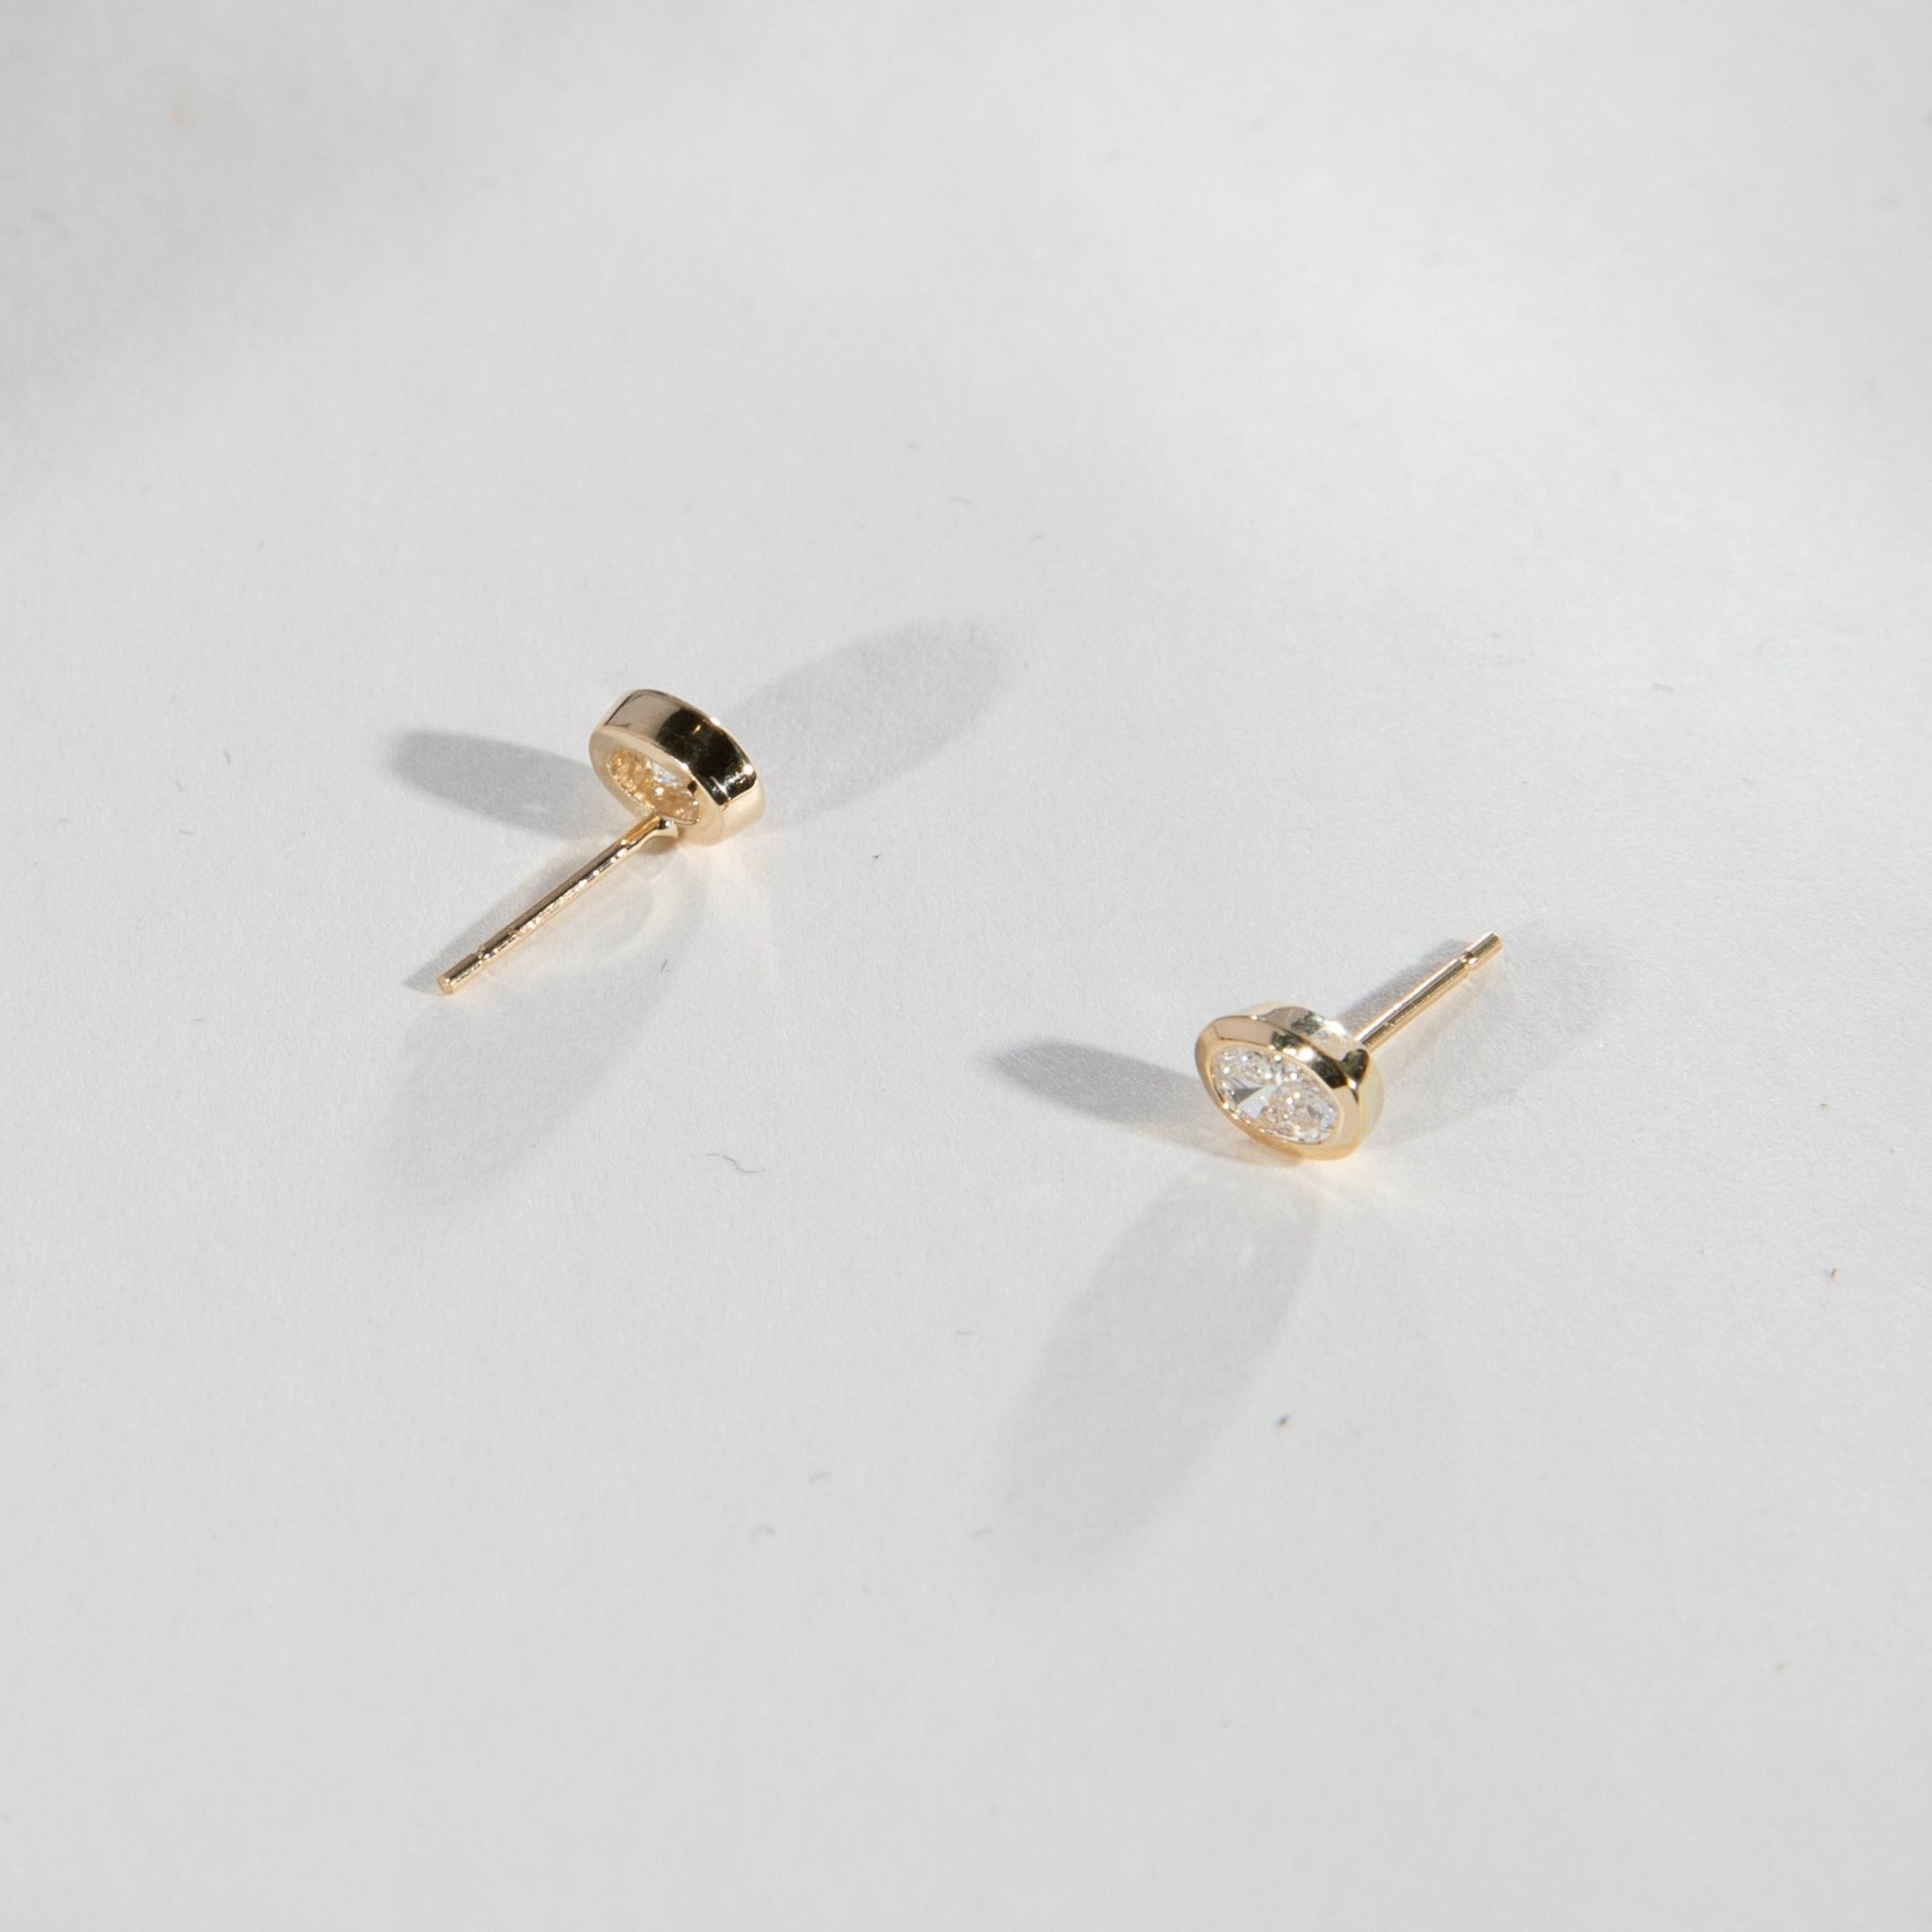 Ana Handmade Earrings in 14k Gold set with lab-grown diamonds By SHW Fine Jewelry New York City